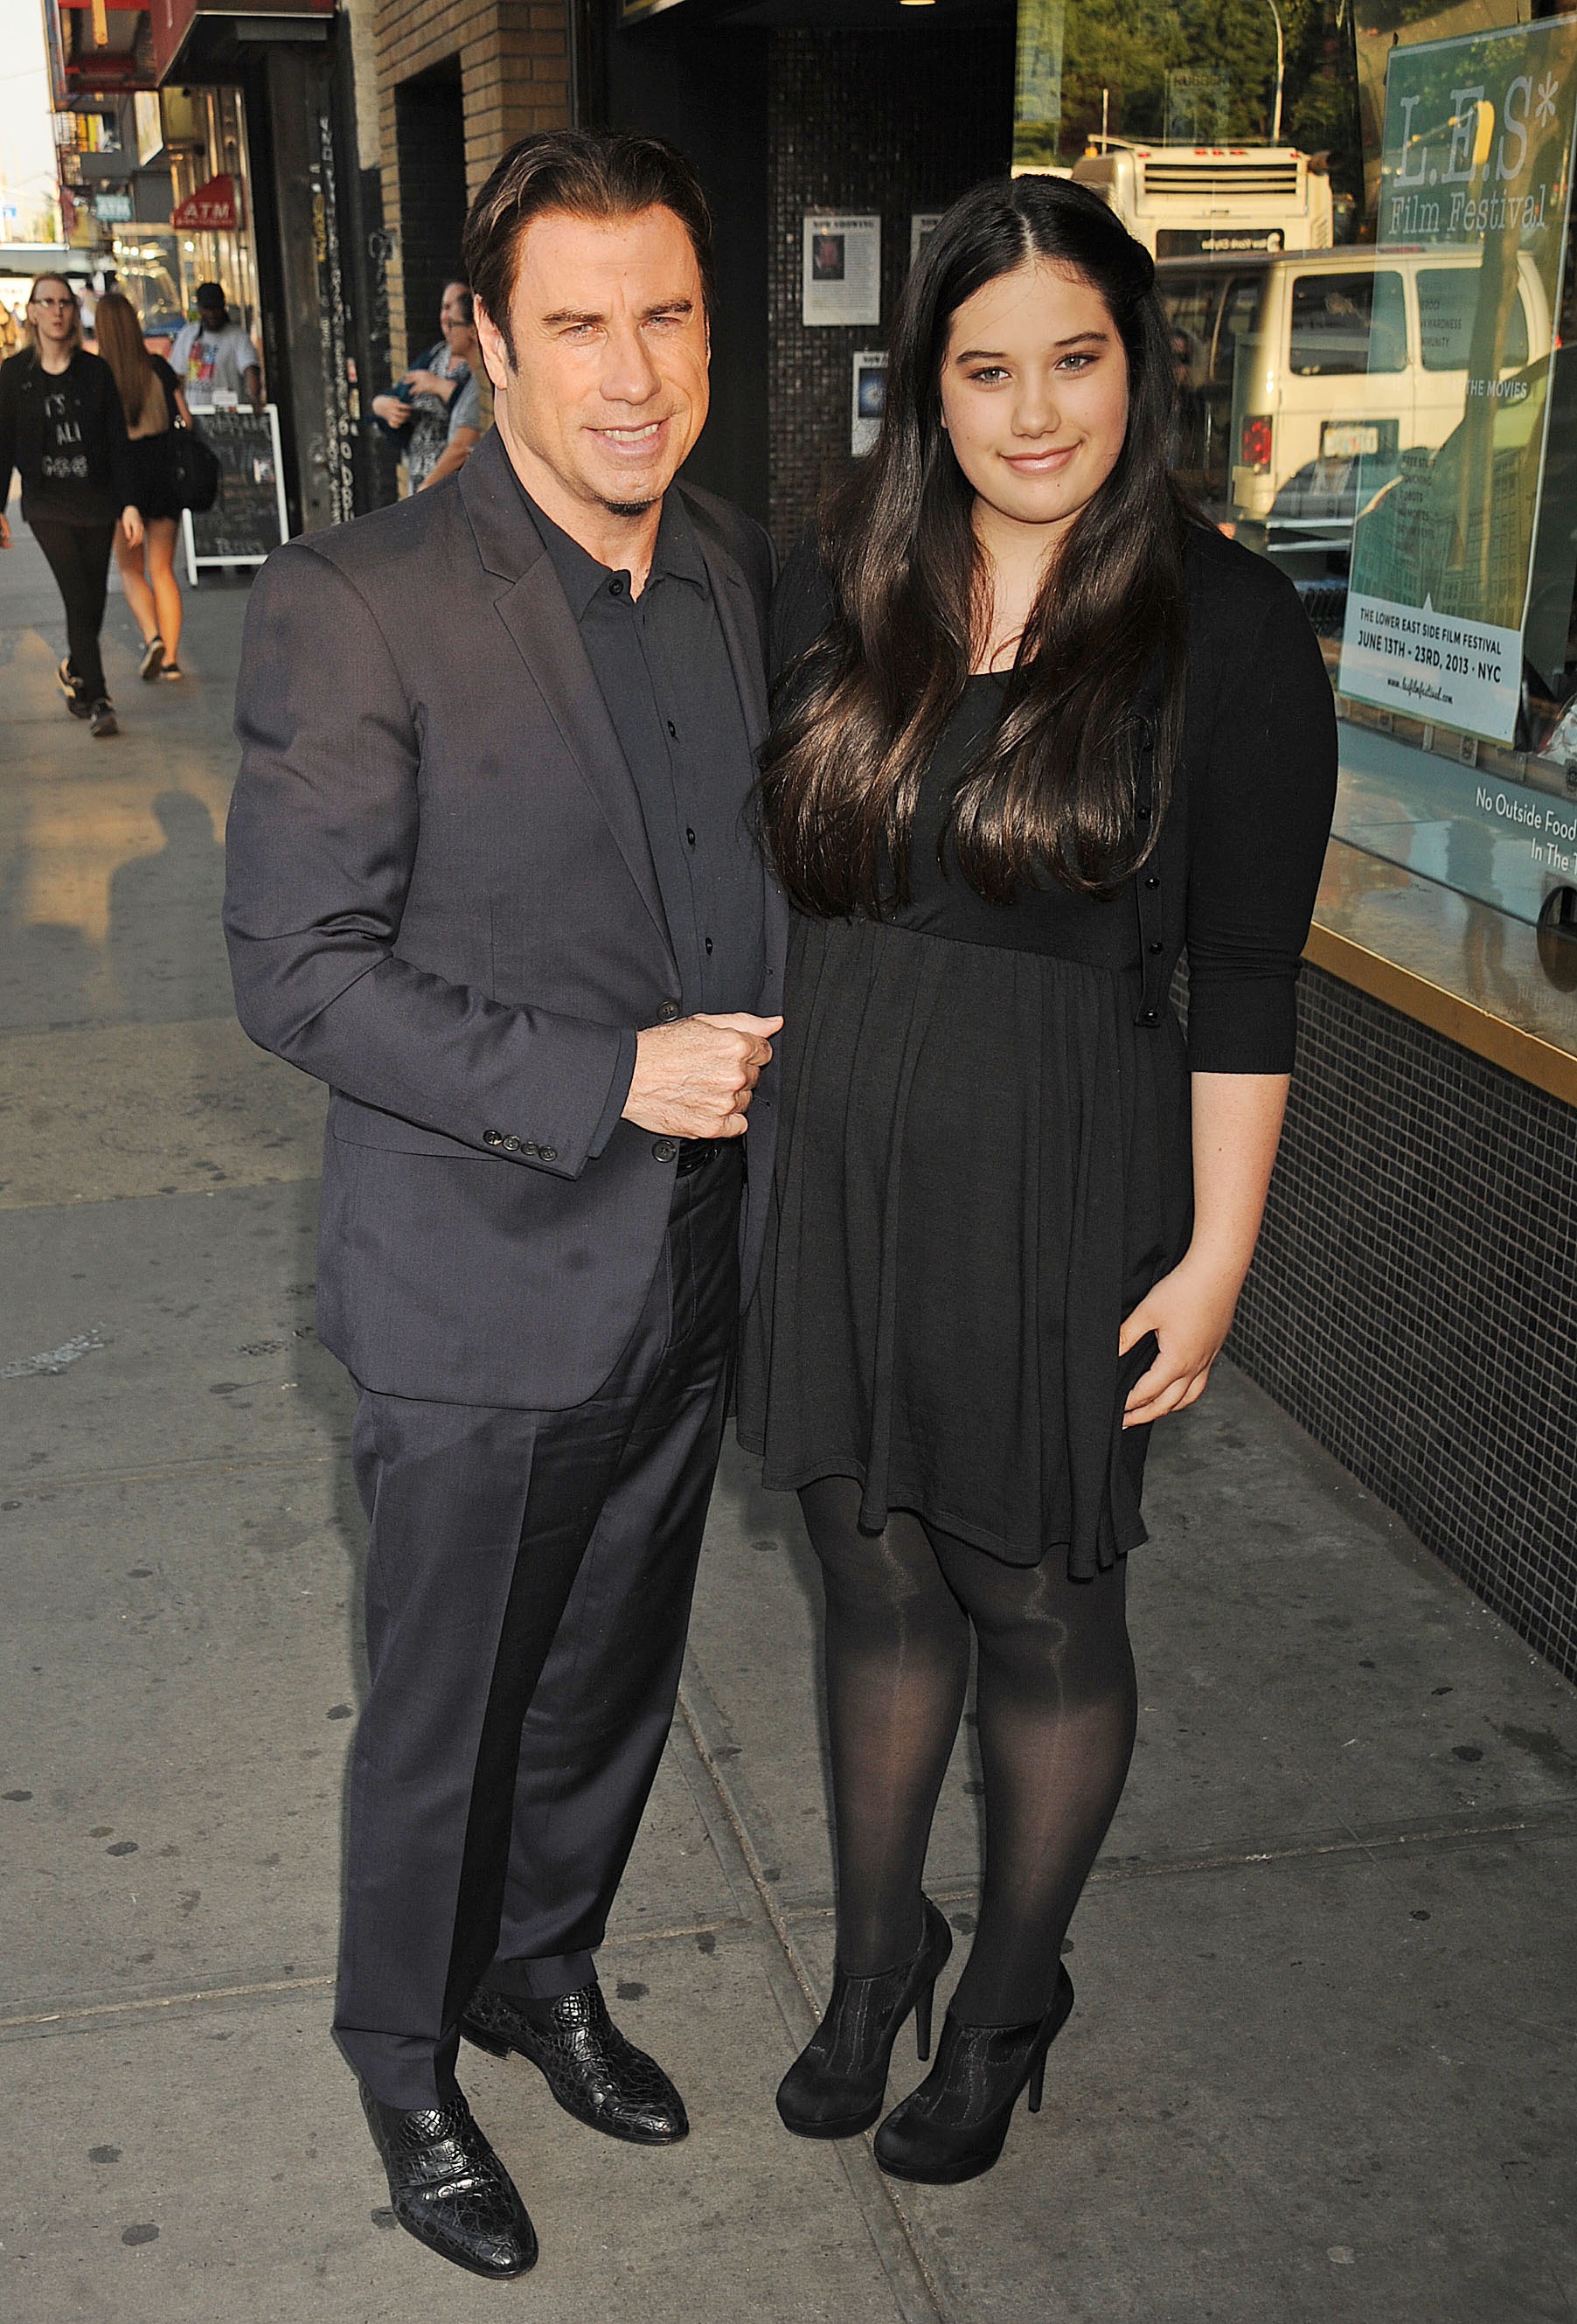 John and Ella Travolta spotted in New York City on June 20, 2013 | Source: Getty Images